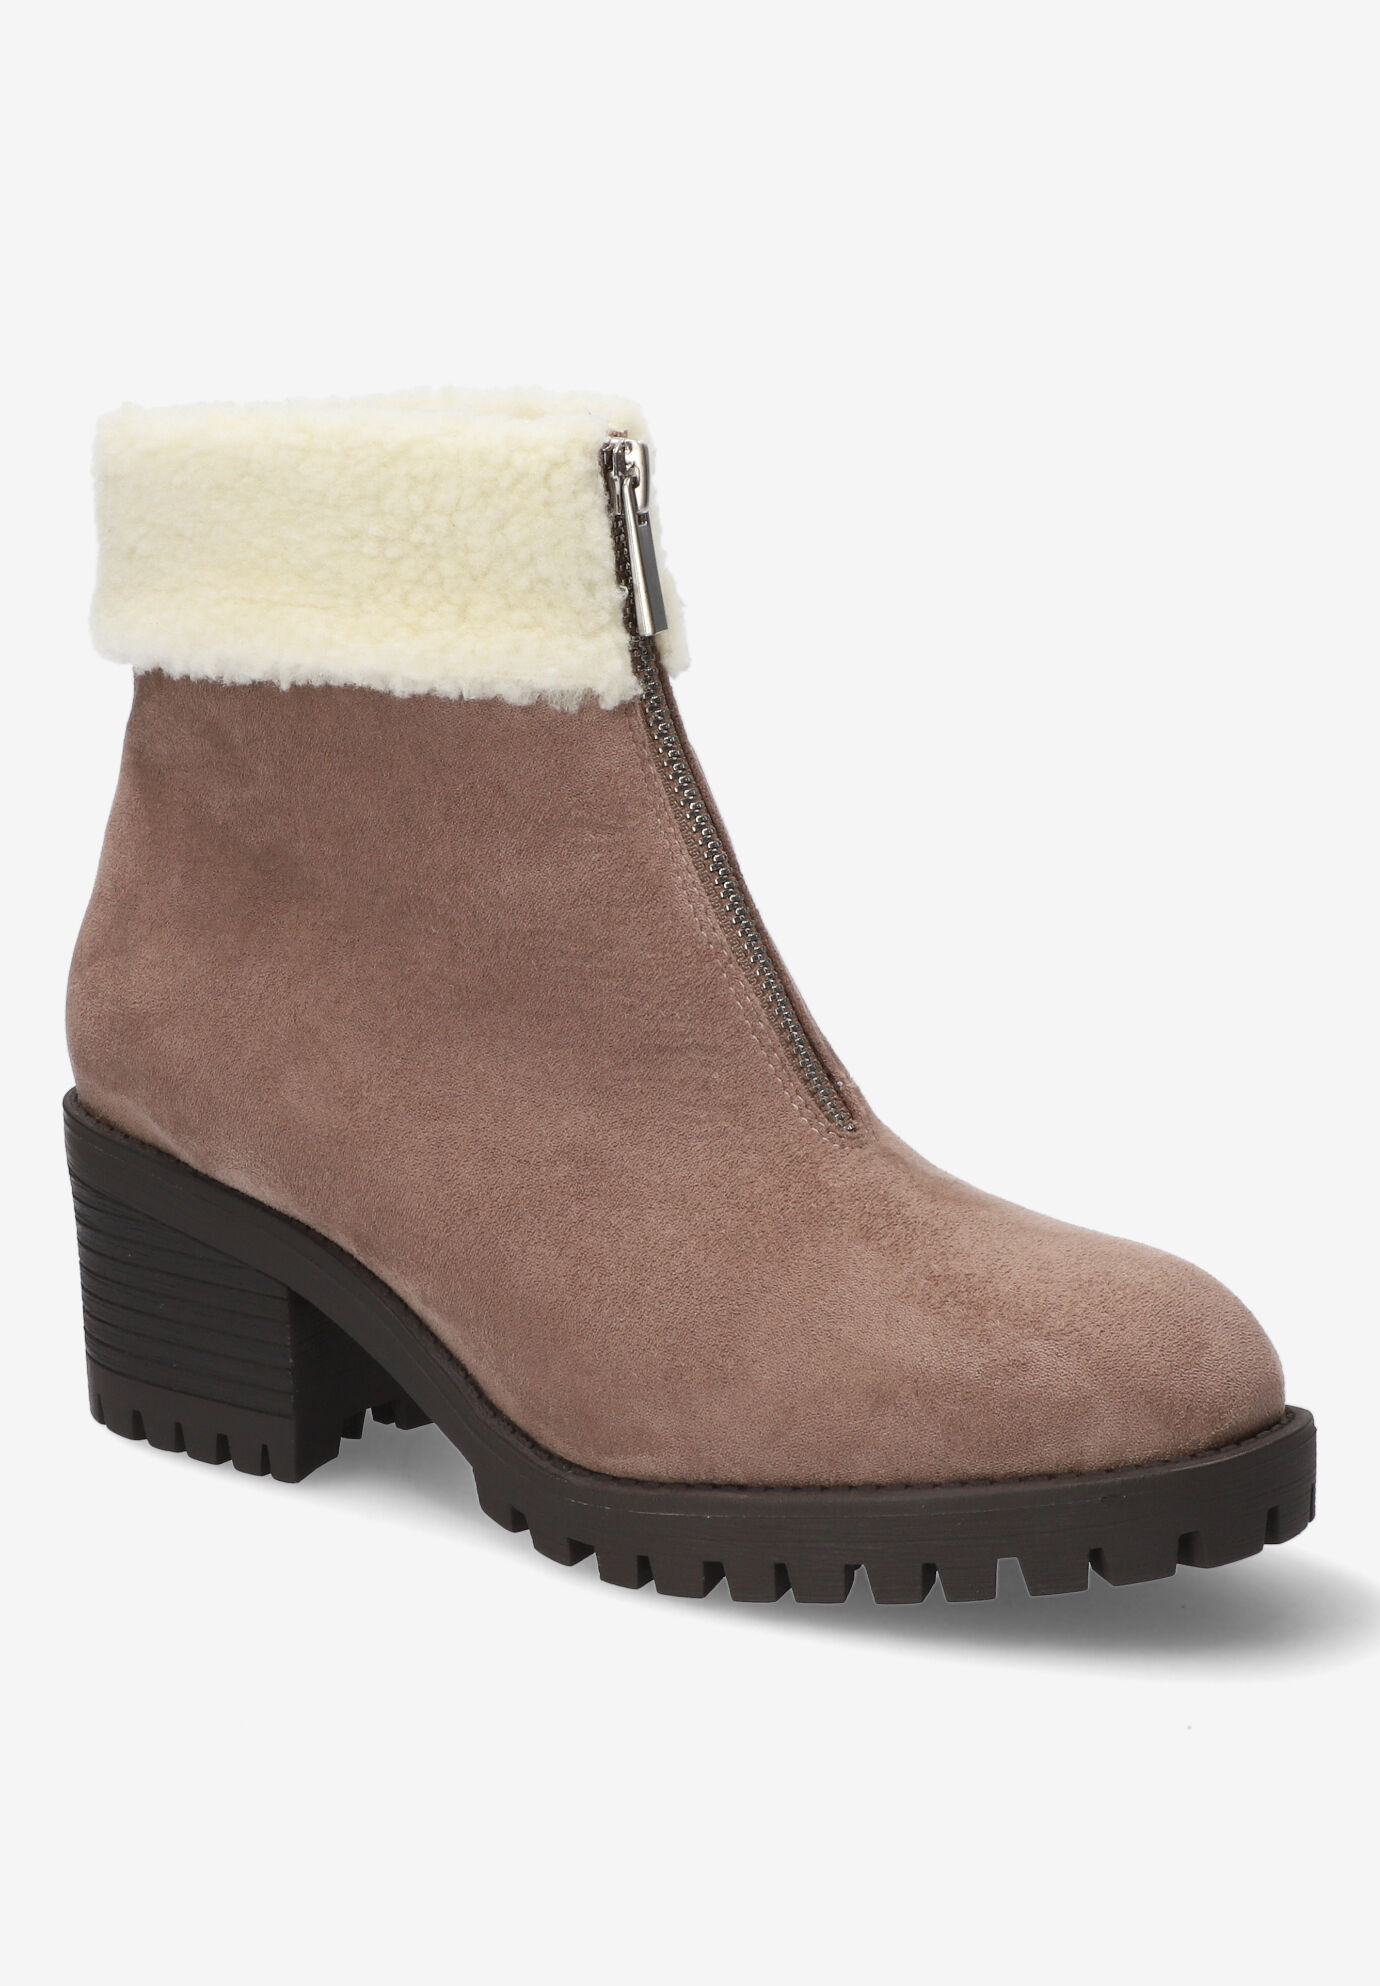 Extra Wide Width Women's Cable Bootie by Bella Vita in Taupe Suede Fleece (Size 8 WW)